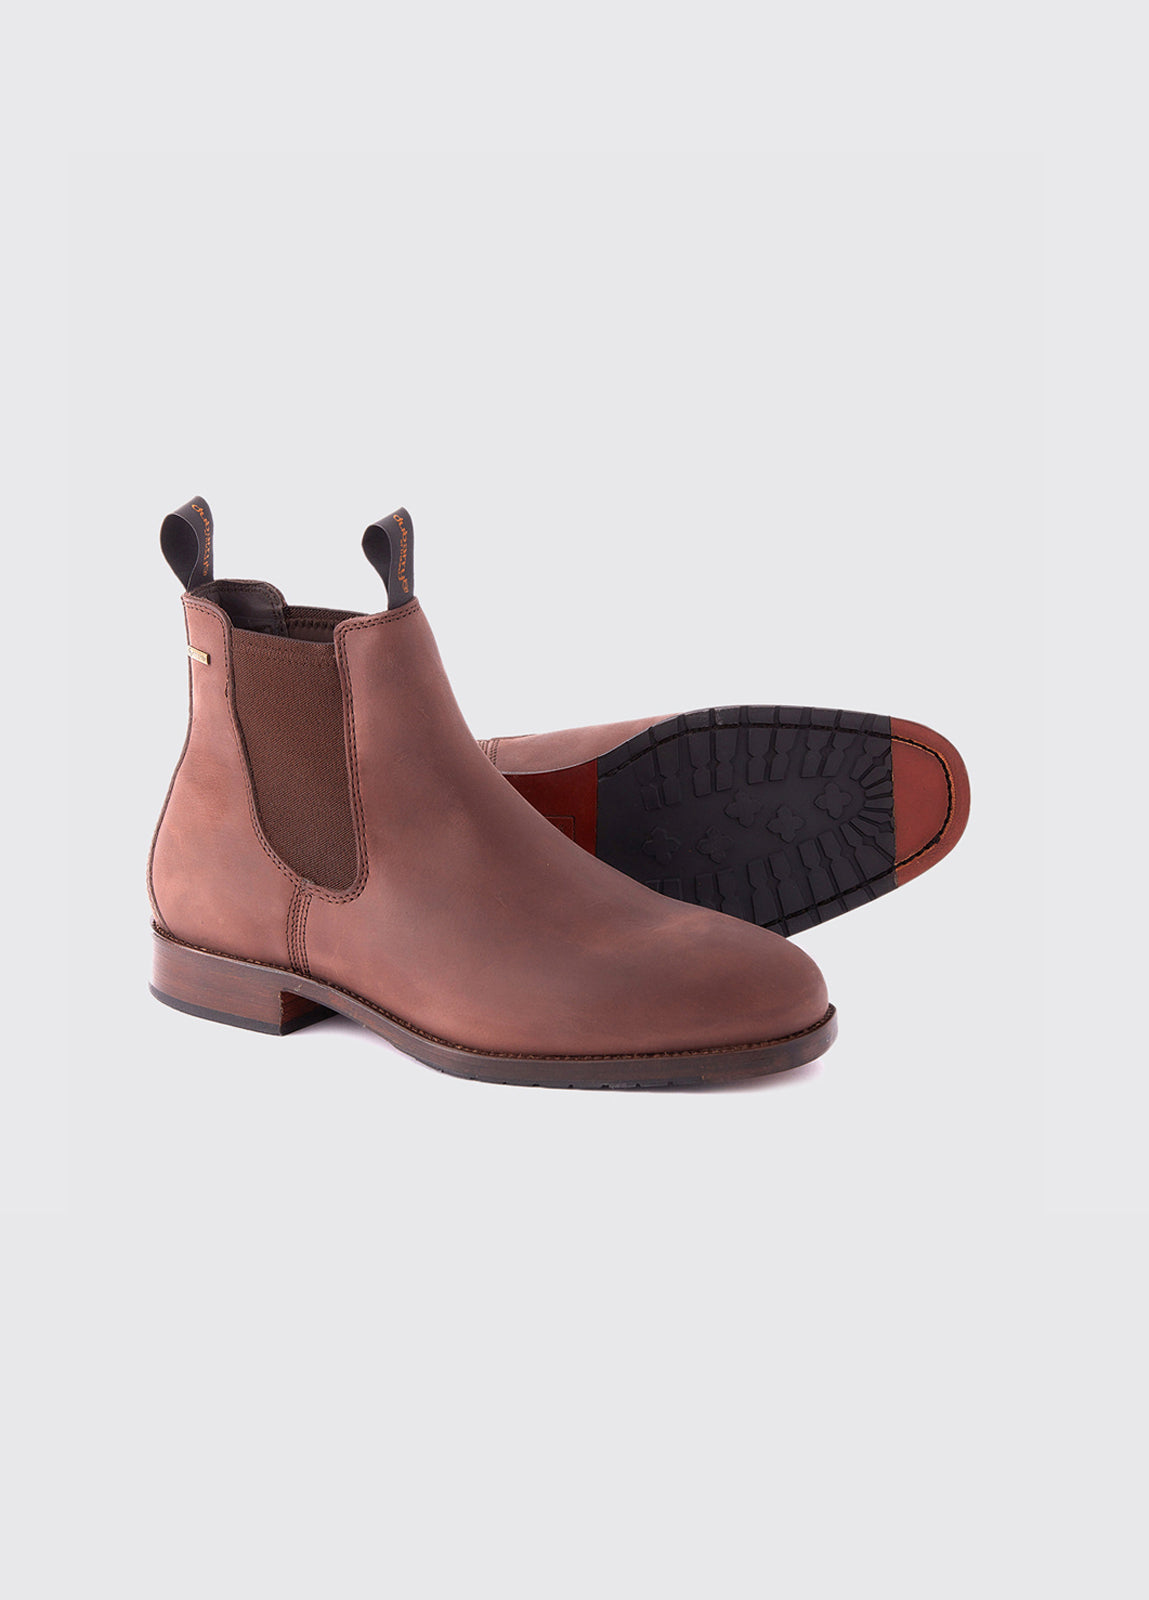 Kerry Leather Soled Boot - Old Rum